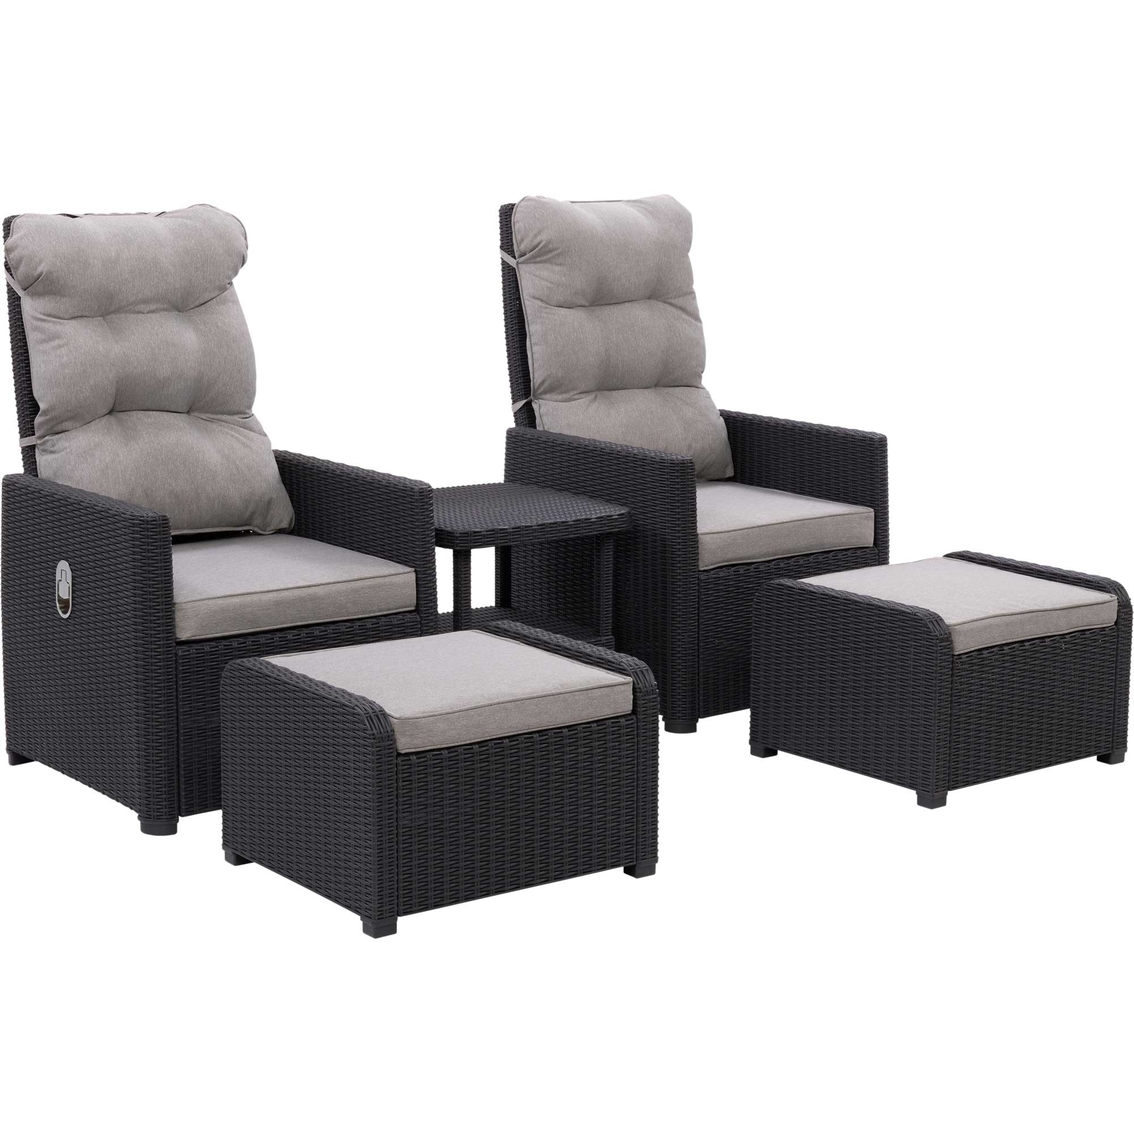 CorLiving Lake Front Rattan Patio Recliner and Ottoman Set 5 pc. - Image 2 of 9